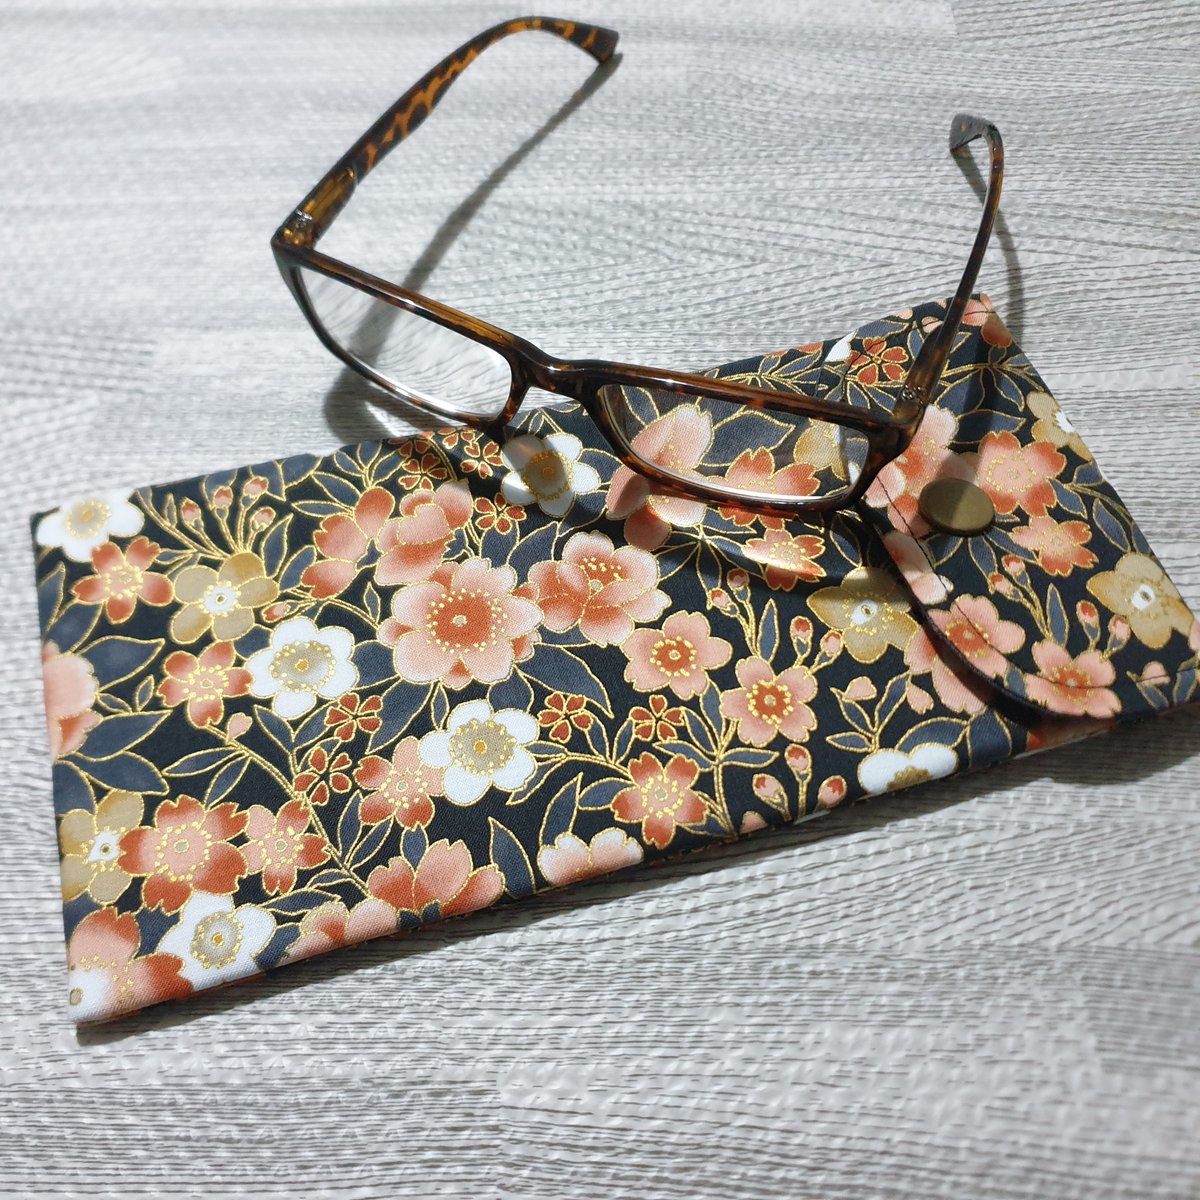 Shop Now From My Profile. Padded Glasses Case in Floral 100% Cotton Fabric.  #cotton #Glasses #glassescase #fyp #gift #facebookseller #facebookstore #facebookhandmade #Facebook #handmadecraftsandgiftsbyjules #floral #flowers